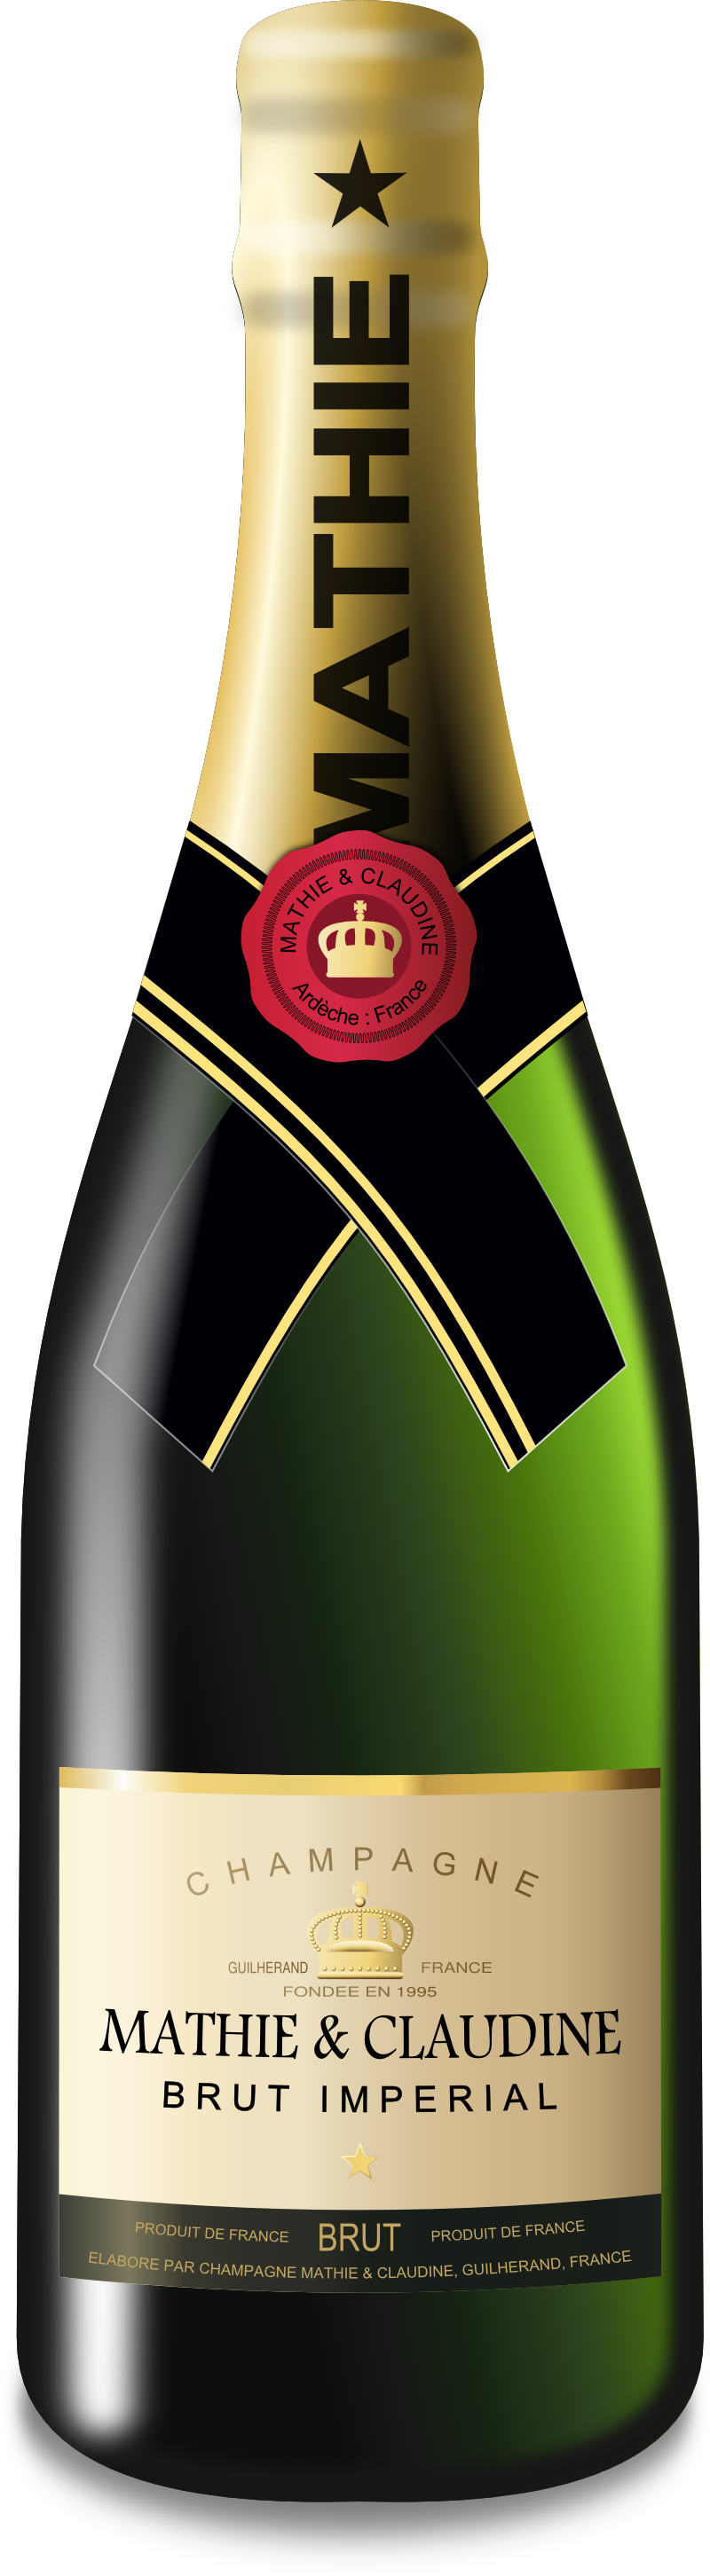 Champagne bottle png. Images glass